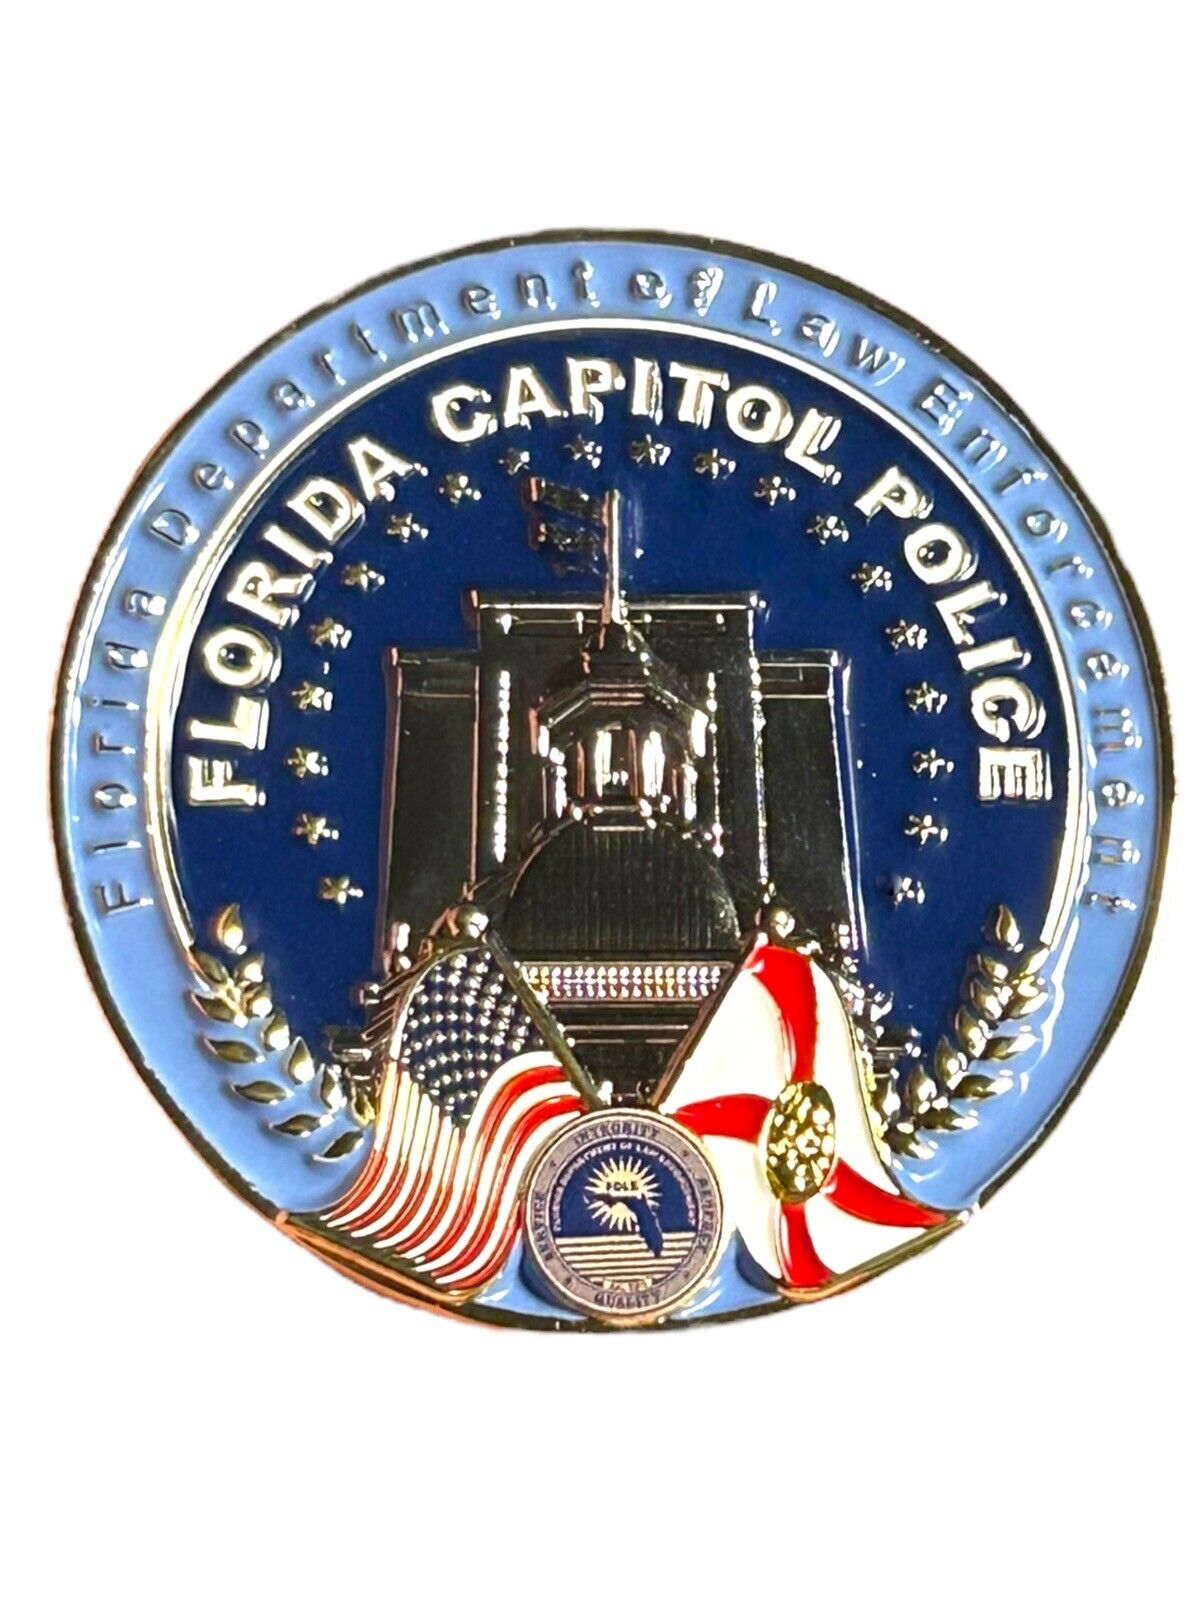 Florida Department of Law Enforcement Florida Capitol Police Challenge Coin FDLE